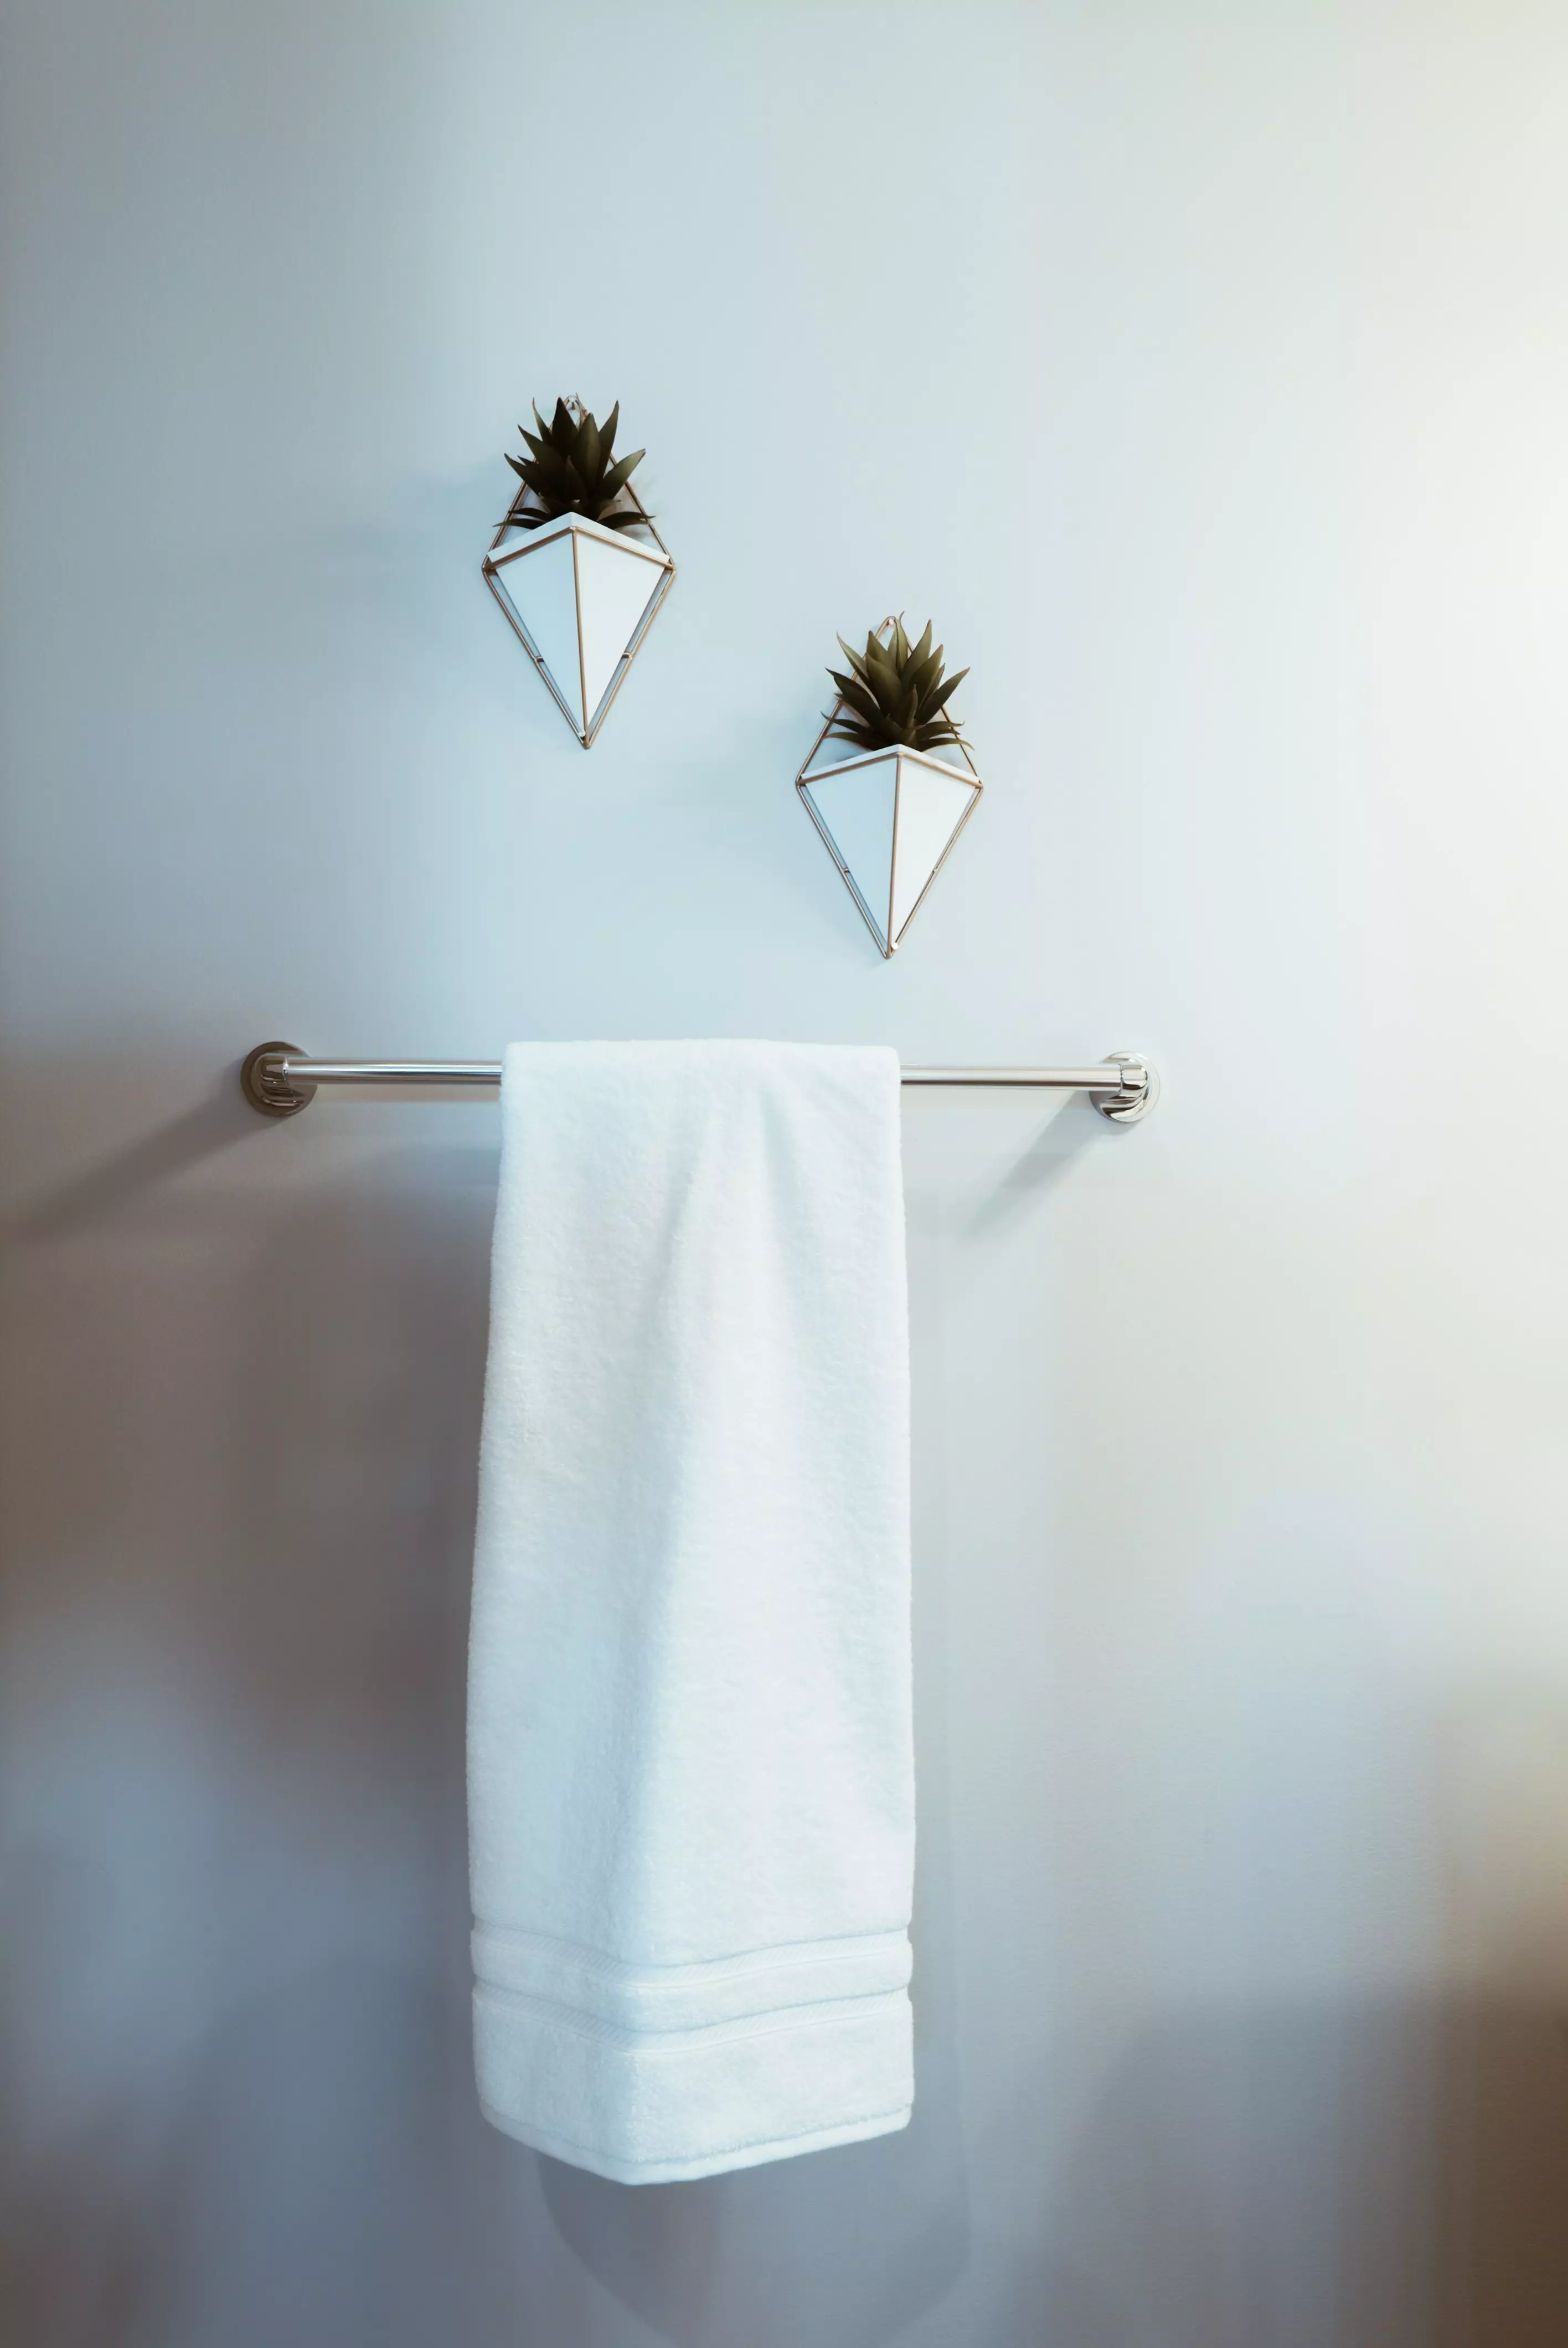 It's now easier than ever to get hotel standard towels (